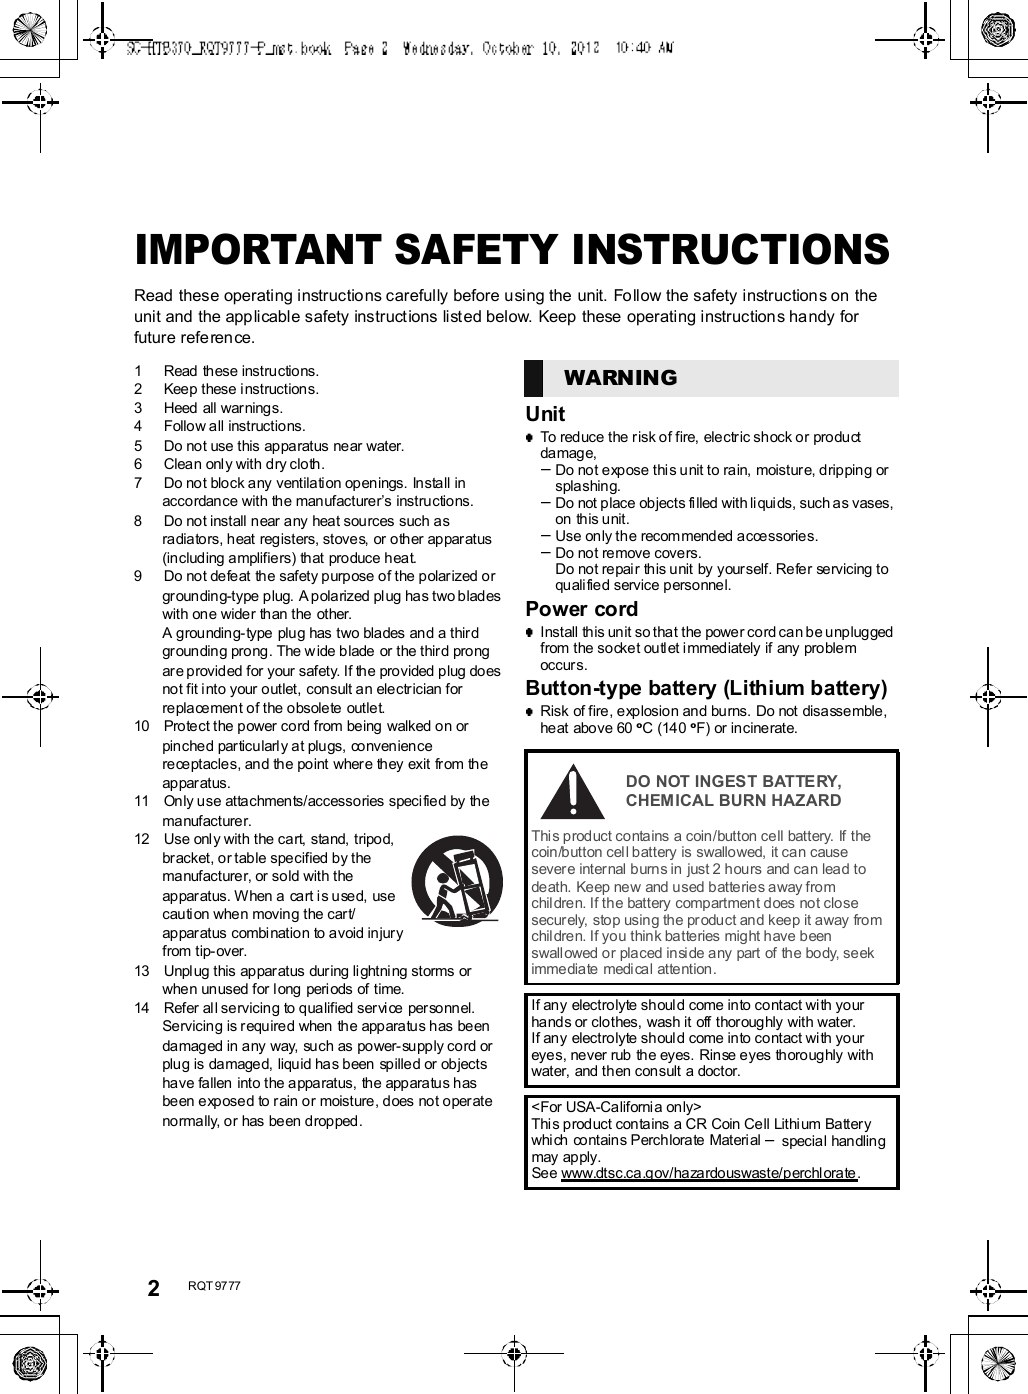 2R QT 97 77IMPORTANT SAFETY INSTRUCTIONSRead these operating instructions carefully before using the unit. Follow the safety instructions on theunit and the applicable safety instructions listed below. Keep these operating instructions handy forfuture reference.1 Read  these instructions.2 Keep these i nstructions.3 Heed  all warnings.4 Follow all instructions.5 Do not use this appa ratus near water.6 Clean onl y with dry cloth.7 Do no t block any ventilati on open ings. Install inaccordan ce with the man ufacturers instructions.8 Do not install near any hea t sou rces such asra diators, heat registers, stoves, or o ther appar atus(including amplifiers) that produce heat.9 Do not de feat  the safety purp ose of the polar ized orgr oun ding-type plug.  A polarized pl ug ha s two blad eswith on e wider th an the other.A grounding- type plug has two bla des and a thirdgr oun ding prong. The w ide blade or the third prongar e provided for your safety. If the pro vided plug doesnot fit i nto your outlet,  consult an electrician forreplacement of the obsolete outlet.10 Protect the power cord from be ing  walked on orpin ched par ticularl y at plu gs, conveniencere ceptacles, and the point wher e th ey exit from theap par atus.11 Only use attachments/accessories specified by thema nufacturer.12 Use only with the cart, stand, tripod,br acket, or table specified by thema nufacturer, or sold with theappar atus. W hen a  ca rt i s u sed,  usecauti on when moving the car t/appar atus combi nation to avoid injuryfrom tip- over.13 Unpl ug this appar atus dur ing lightni ng storms orwhe n unused for long  peri ods of time.14 Refer al l servicing to qualified ser vi ce per sonnel.Servicin g is required when  the appara tus has be endamaged in any way, such as power-supply cord orplu g is damage d, liquid has been  spilled or objectshave fallen  into the a ppa ratus, the app aratus hasbeen exposed to r ain or moisture , does  not oper atenormally, or has been dropped.UnitTo reduce the risk of fire, electric shock or productdamage,Do no t expose thi s u nit to rain,  moistur e, dripping orspla shing.Do not place objects fi lled with li quids, such as vases,on this unit.Use only the recom mended accessories.Do not remove covers.Do not repair this unit by yourself. Refer servicing toquali fied service personnel.Power cordInstall this unit so that the power cord can be unp luggedfrom the socke t ou tl et i mmediately if any pro blemoccurs.Button-type battery (Lithium battery)Risk of fire, explosion and burns.  Do not  disassemble,heat above 60 oC (140 oF) or incinerate.WARNINGDO NOT INGEST BATTERY,CHEMICAL BURN HAZARDThis product contains a coin/button cell battery. If thecoin /button cel l battery is swallo wed, it can causesevere internal b urns in  just 2 hours  and can lead todeath. Keep new and used batteries away fromchil dren. If the battery  comp artment d oes  no t closesecurely, stop usin g th e pr oduct and keep it away fromchil dren. If you thin k ba tteries mig ht have b eenswall owed or placed inside a ny part  of  the body, se ekimmediate medical attention.If any electro lyte shoul d come into contact wi th yourhand s or clothes, wash it off thor oug hly with water.If any electro lyte shoul d come into contact wi th youreyes, never rub  the eyes. Rinse e yes thoroug hly withwater,  and then con sult a doctor.&lt;For USA-California only&gt;This prod uct contains a CR Coin Cell Lithi um Batter ywhi ch  contains Perchlorate  Materi al  special handlingmay apply.See www.dtsc.ca.gov/ha zardouswaste/perchl orate.